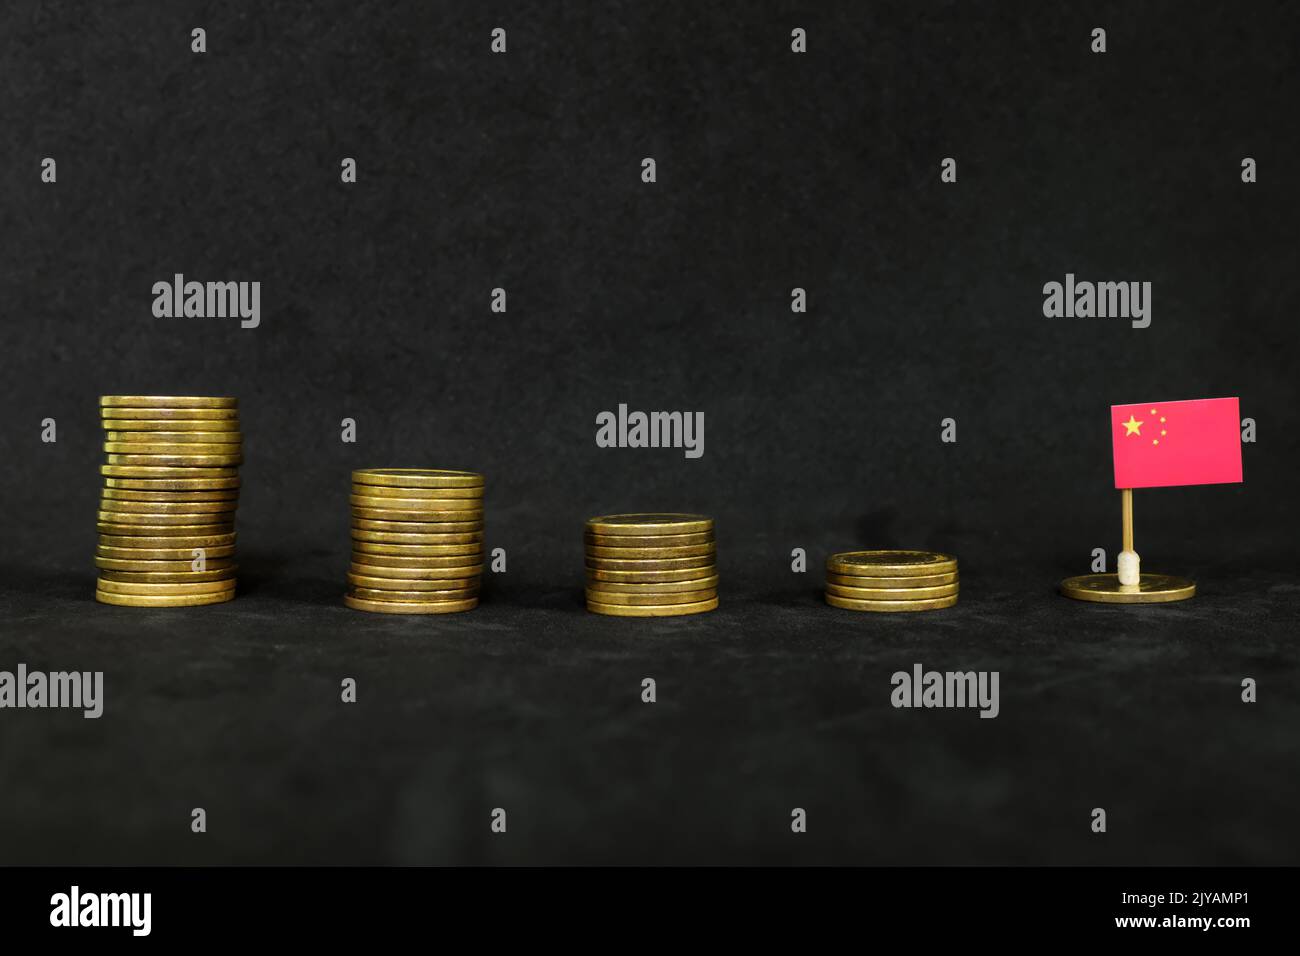 China economic recession, financial crisis and currency depreciation concept. Chinese flag in decreasing stack of coins in dark black background. Stock Photo